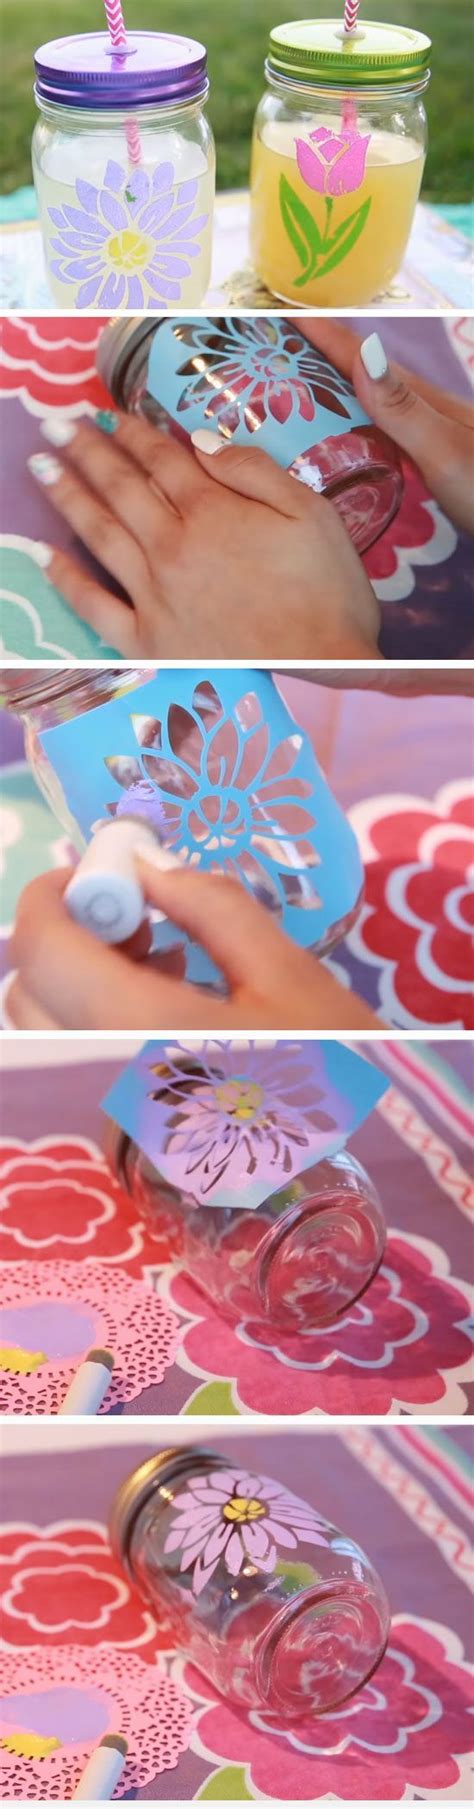 Finally…a birthday gift for mom from her daughter that will make her laugh and make your siblings totally jealous of you. 24 Creative DIY Gift Ideas | Birthday gifts for best ...